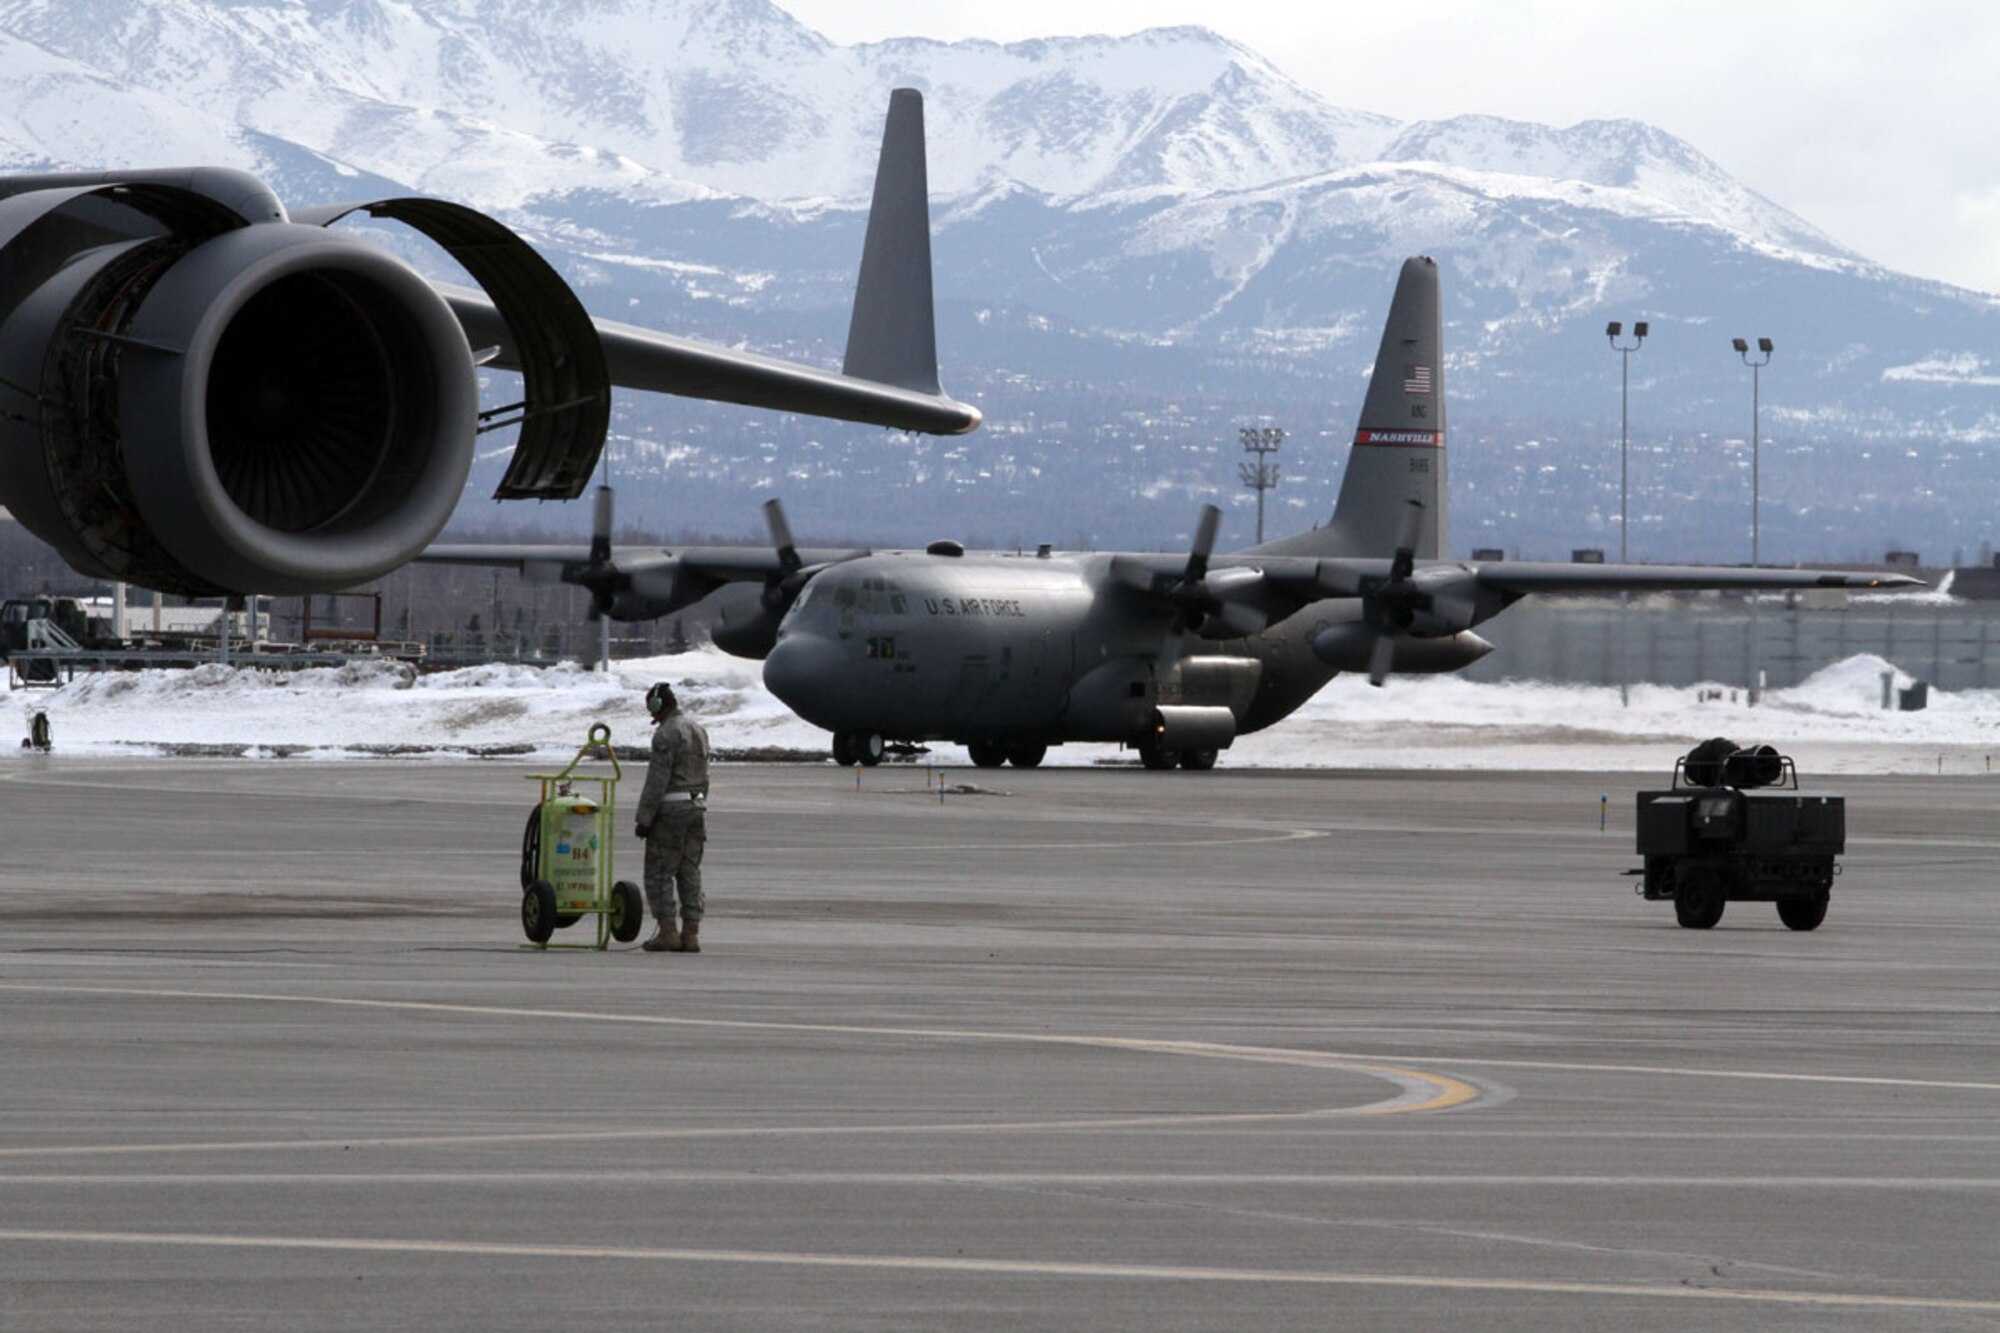 A C-130 Hercules from the Tennessee Air National Guard taxis at Joint base Elmendorf-Richardson, March 24.  (U.S. Air National Guard photo/Staff Sgt. Karima Turner)